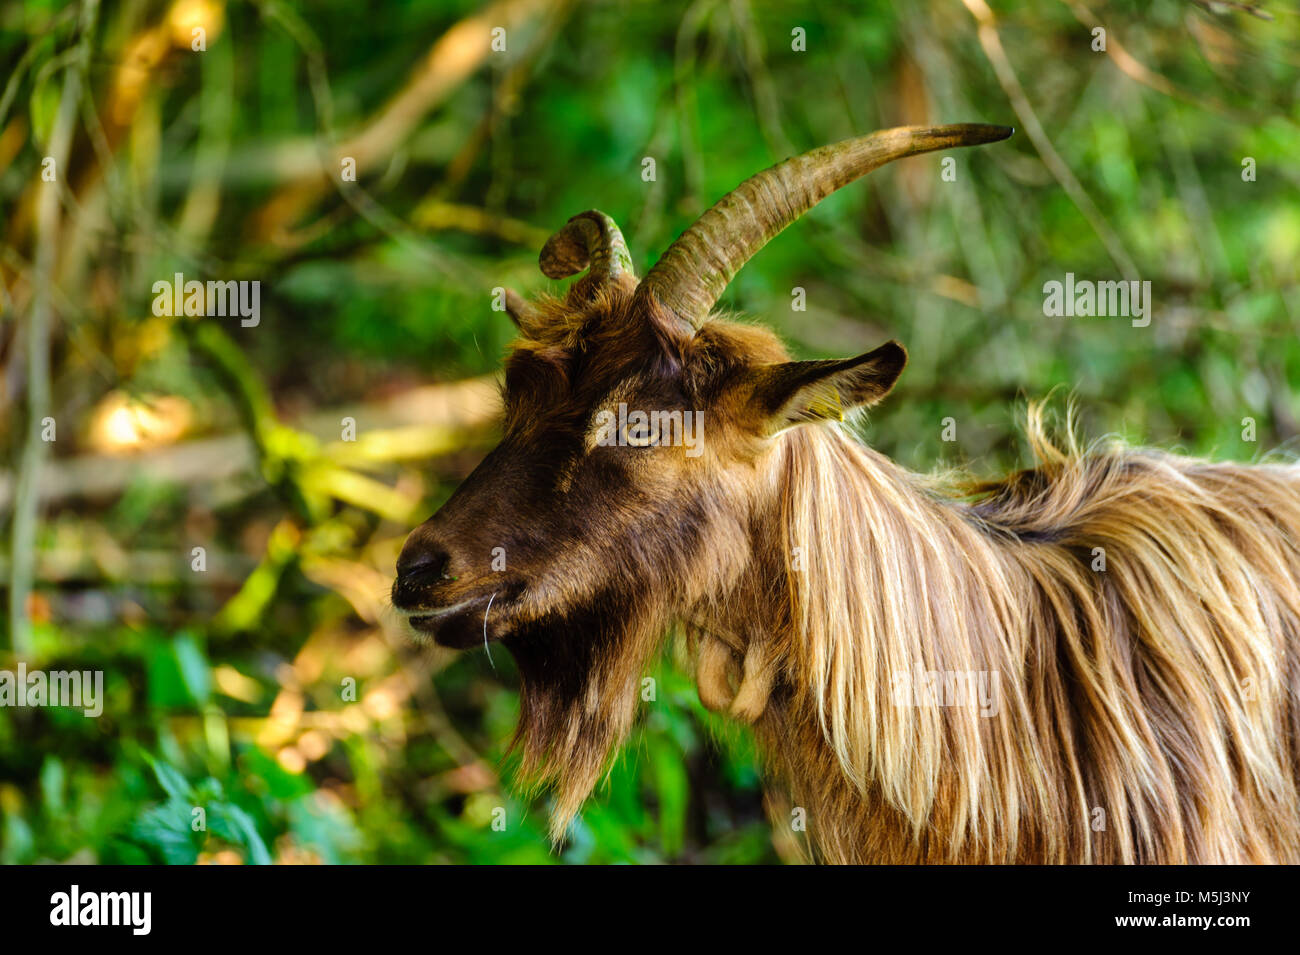 Goat in nature with horns, beard, brown fur, eating, selective focus, shallow depth of field. Stock Photo